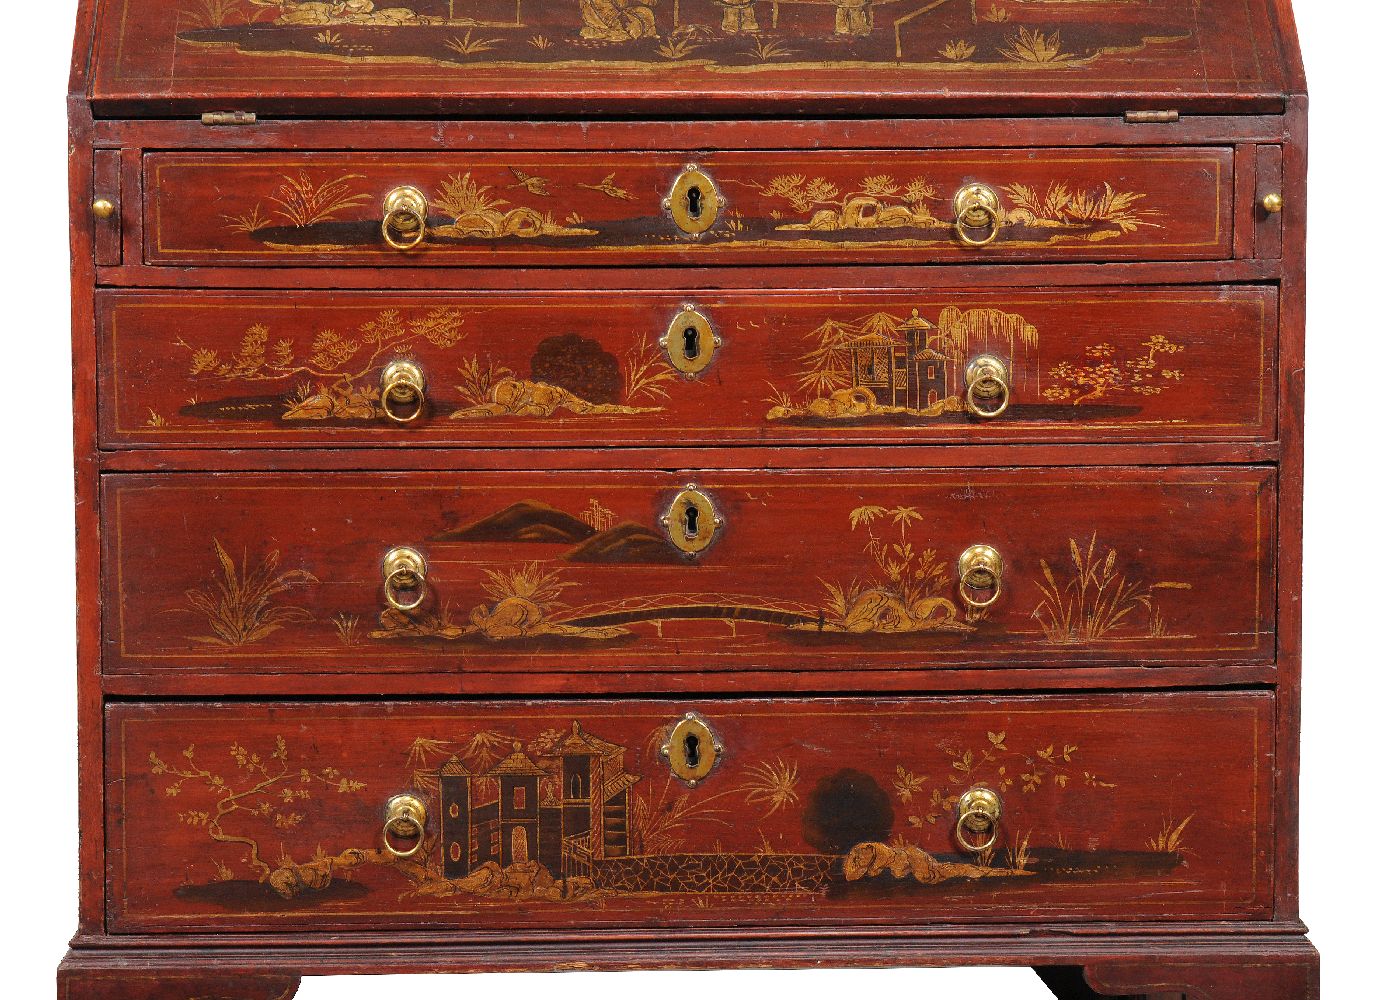 A George II red lacquer and gilt Chinoiserie decorated bureau, circa 1740 the decoration depicting - Image 4 of 5